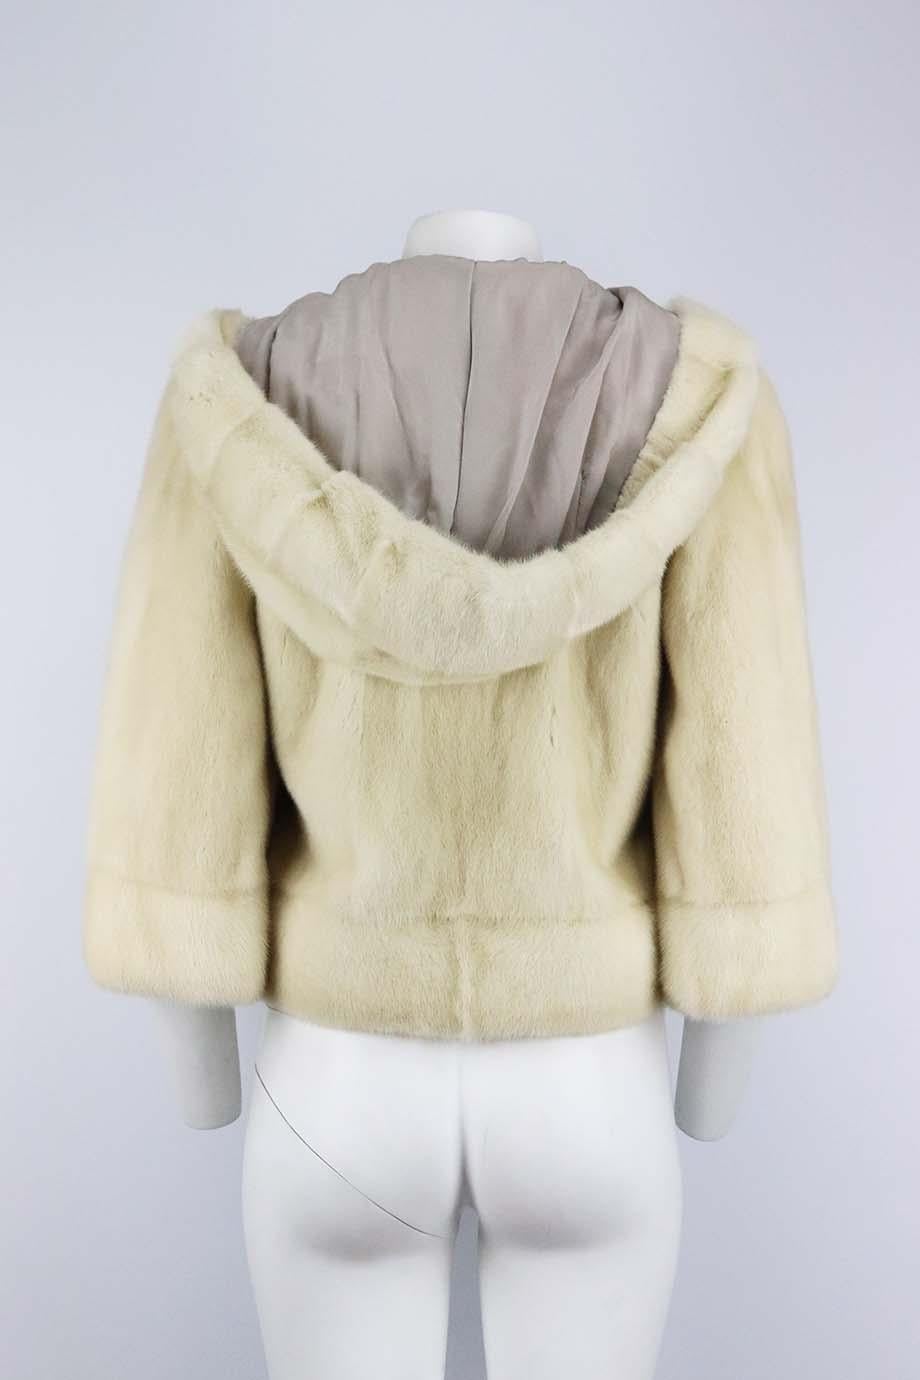 This beautiful Yves Salomon coat is made in a hooded cream slightly cropped silhouette in Paris and has magnetic pockets at front and internal silk lining with hook fastening, this coat is a beautiful investment piece for your wardrobe. Cream